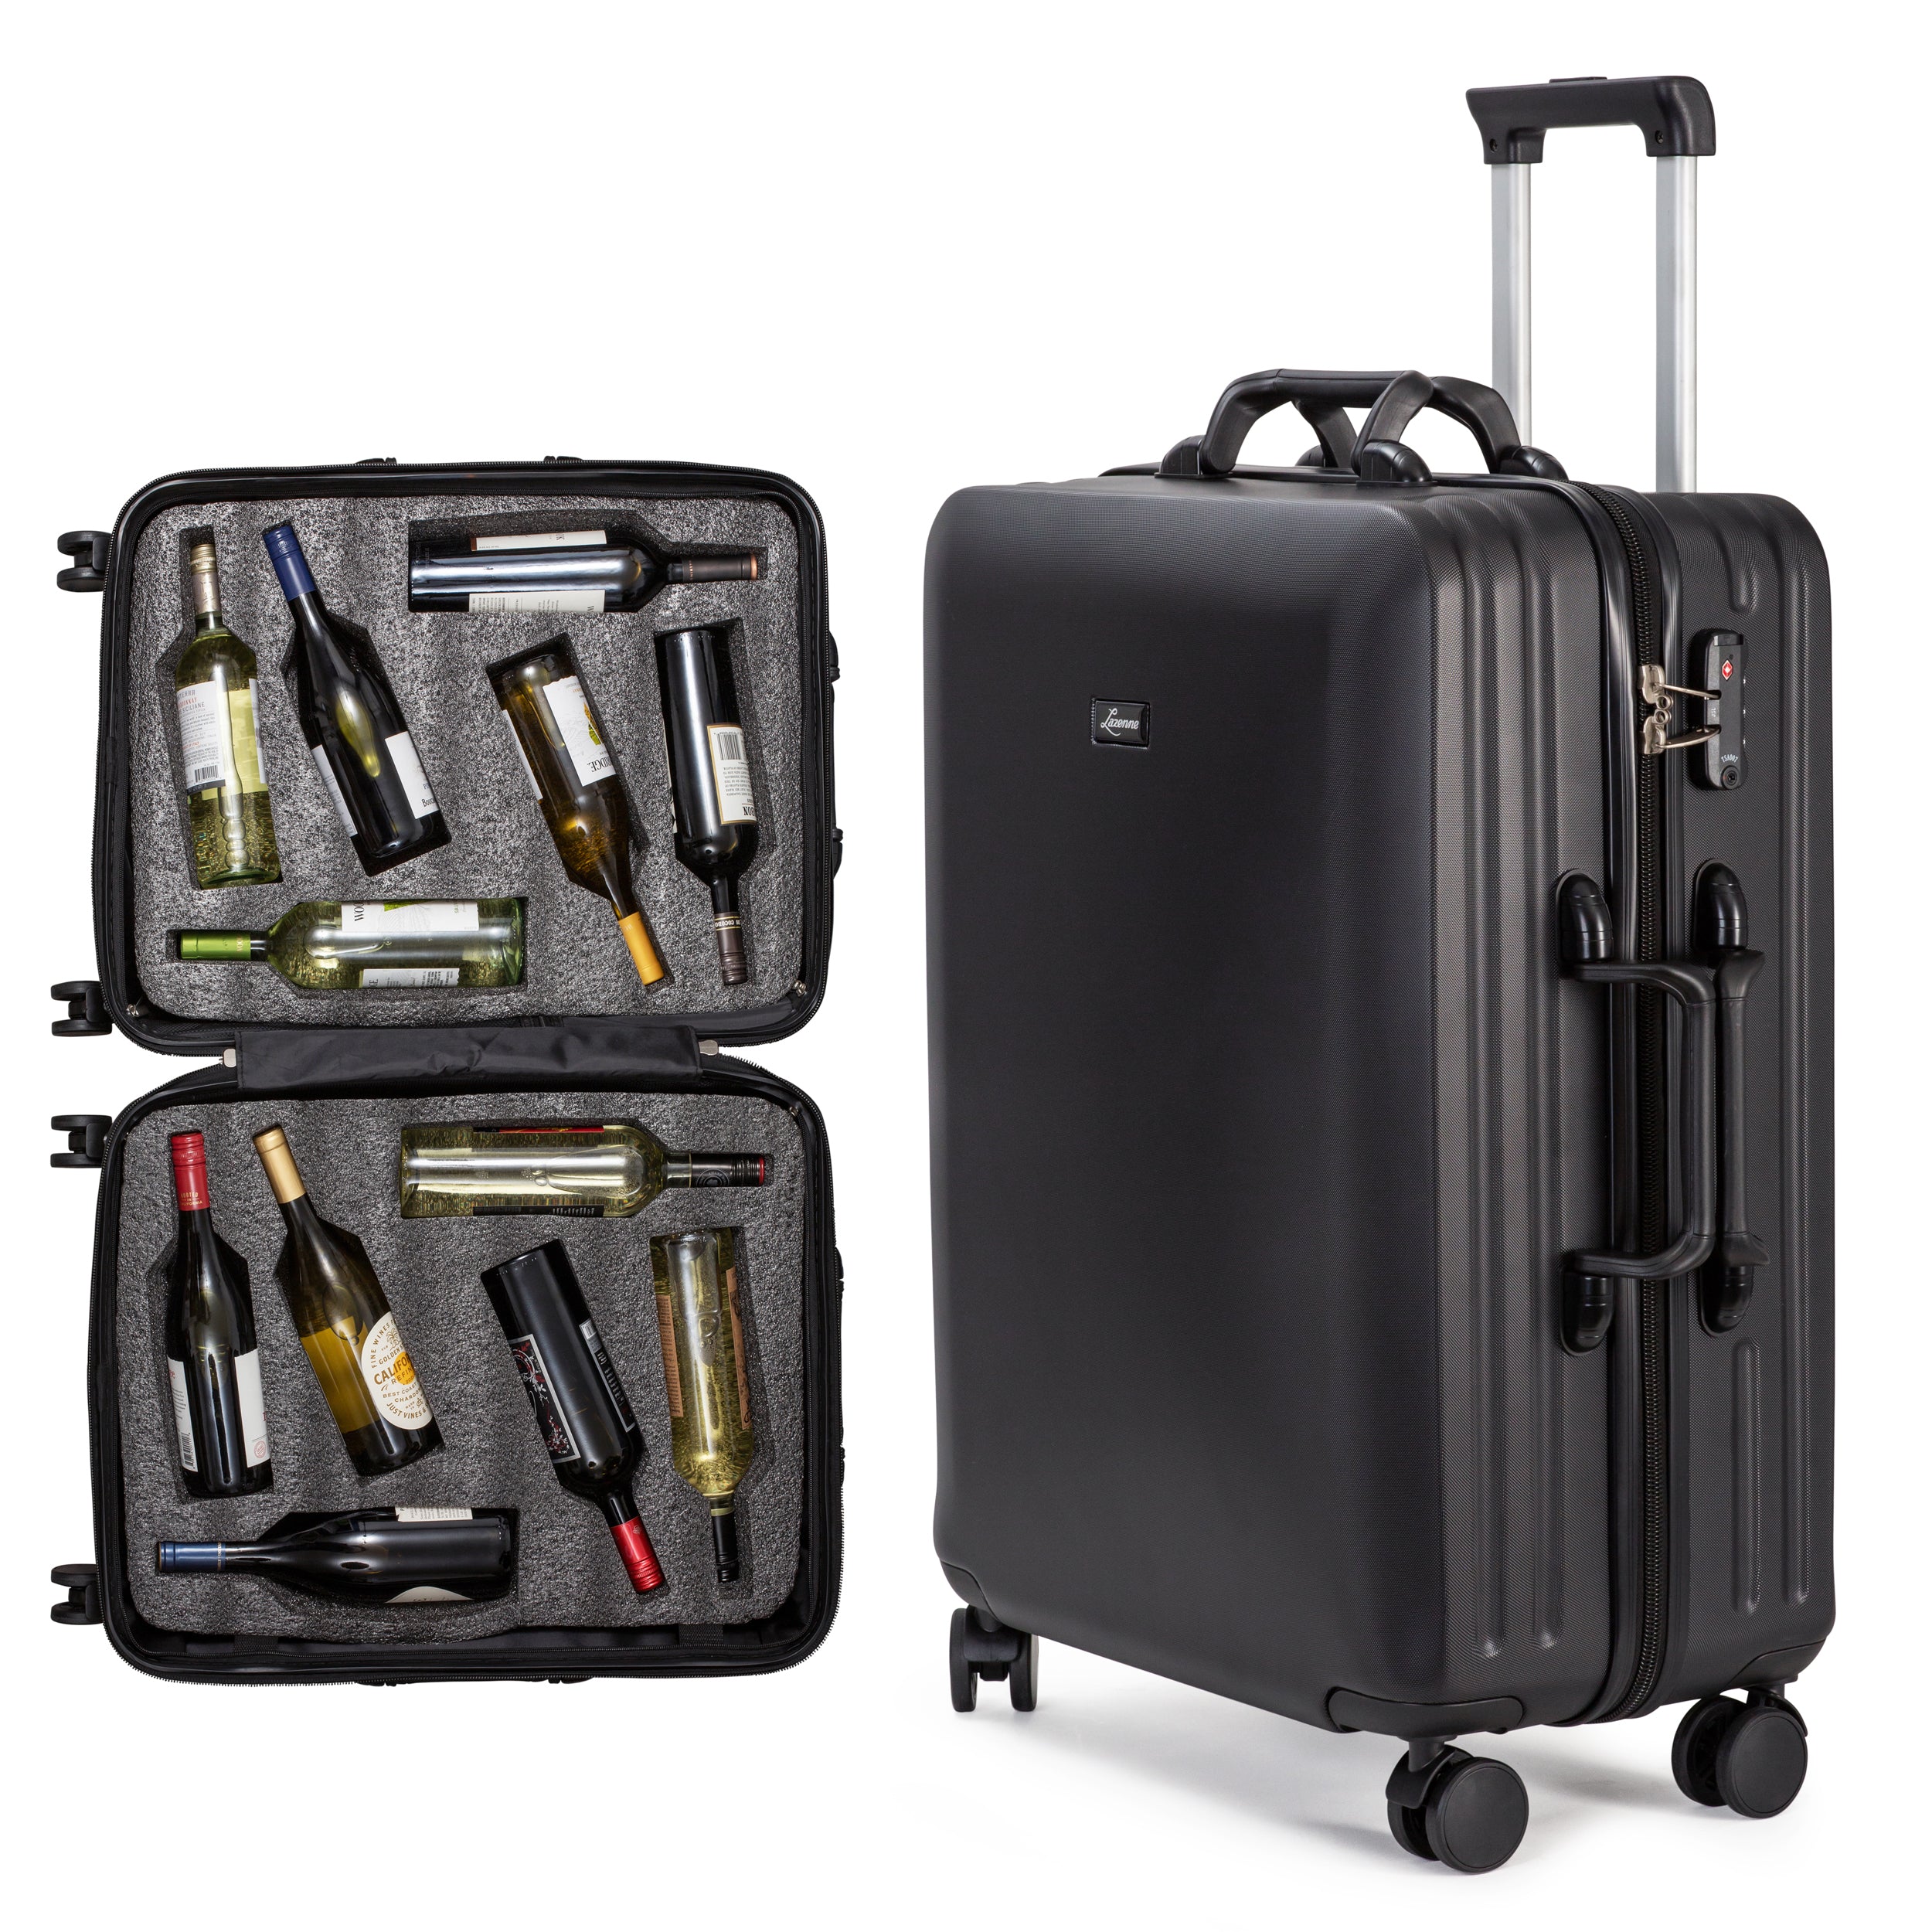 LAZENNE WINE TRAVEL SUITCASE 12 BOTTLES WITH REMOVABLE INSERTS - TSA AIRLINE APPROVED, 10-YEARS WARRANTY